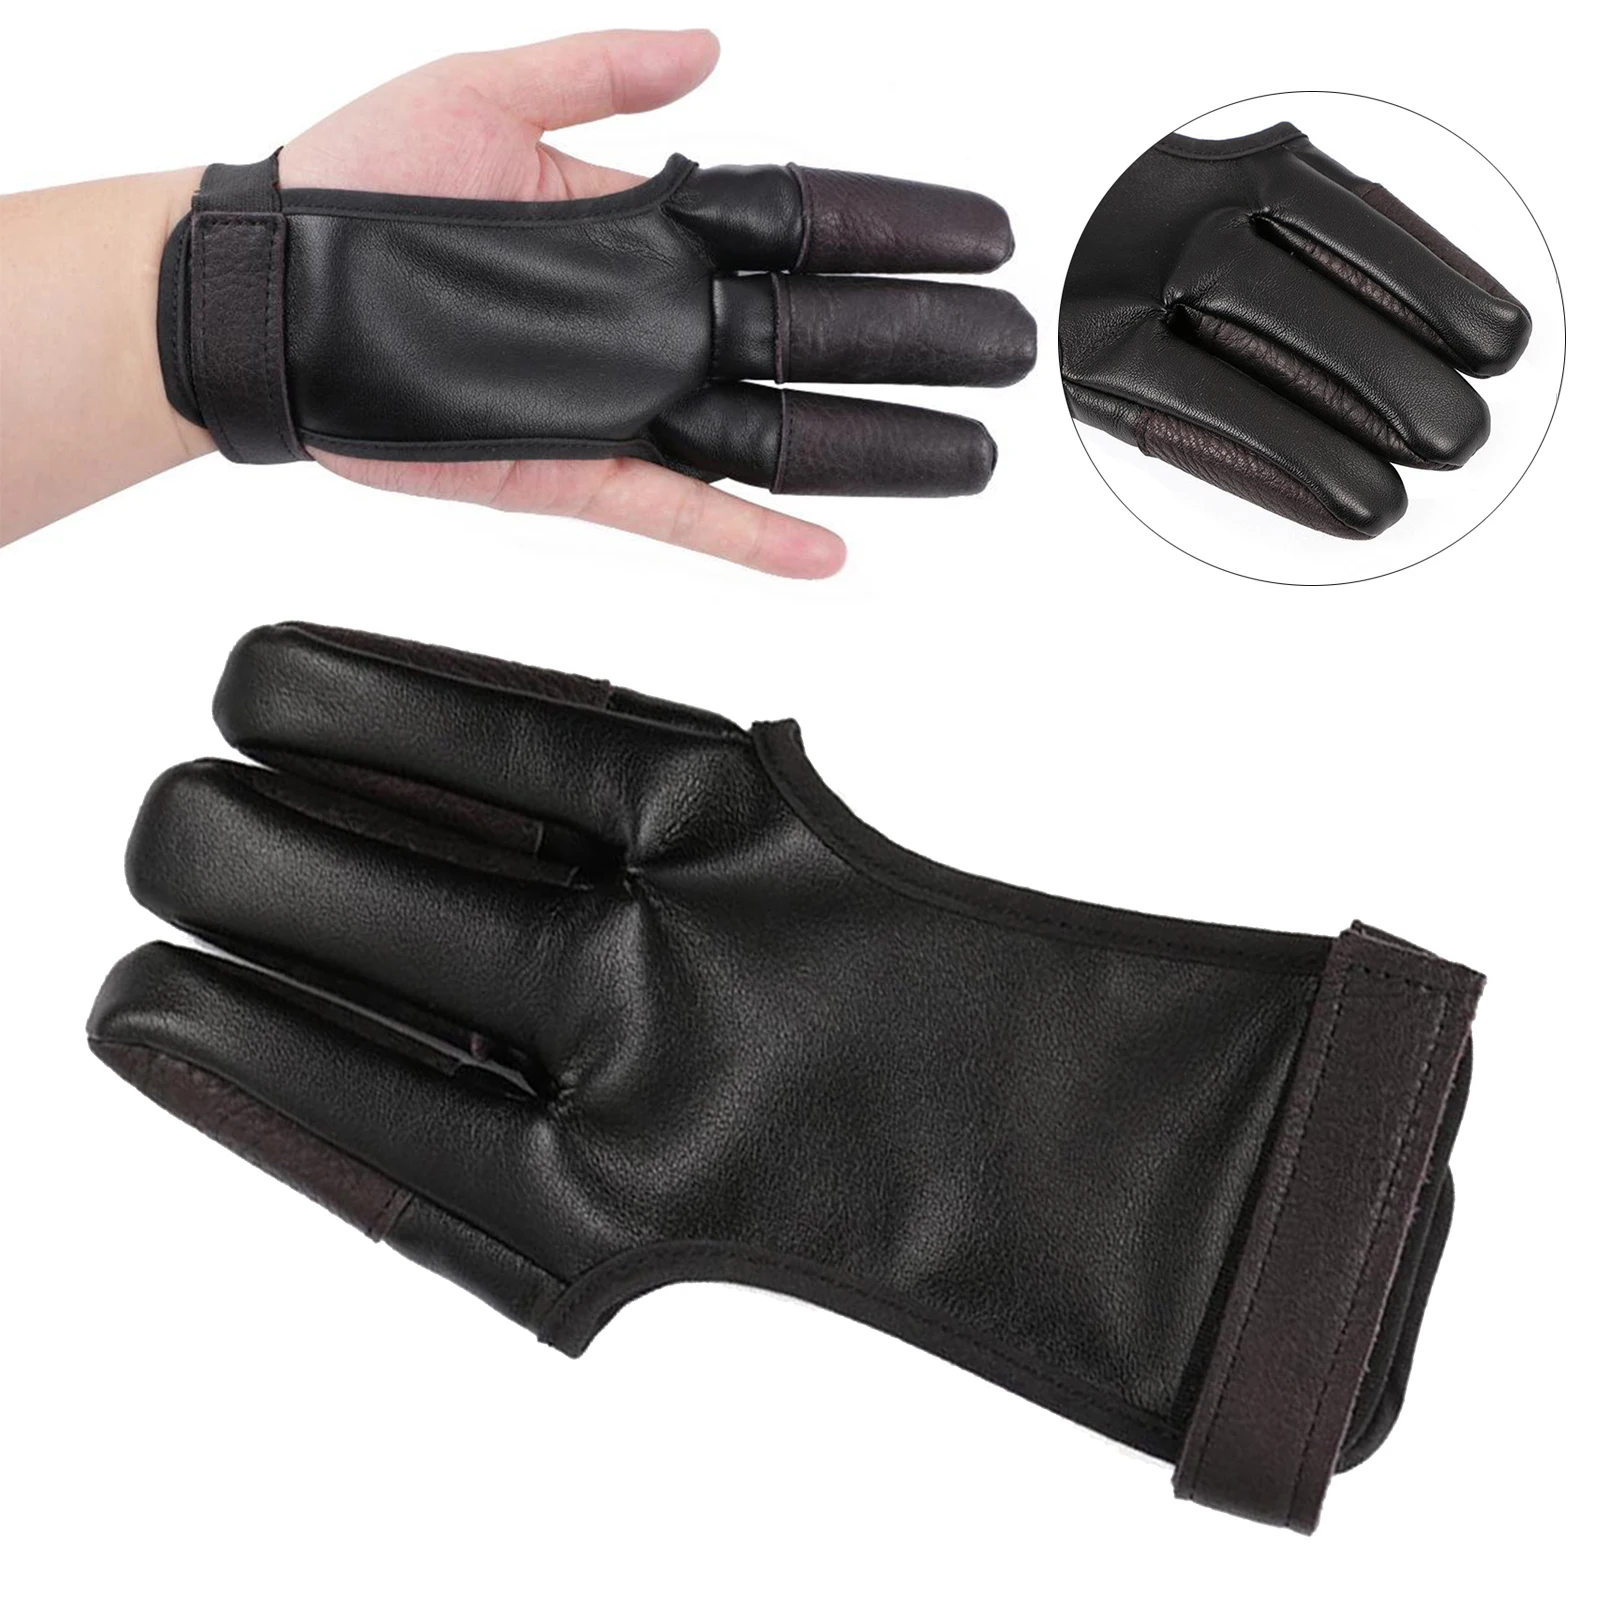 Leather Archery Gloves 3-Finger 19x5cm  Fingers Tab Guard Protector